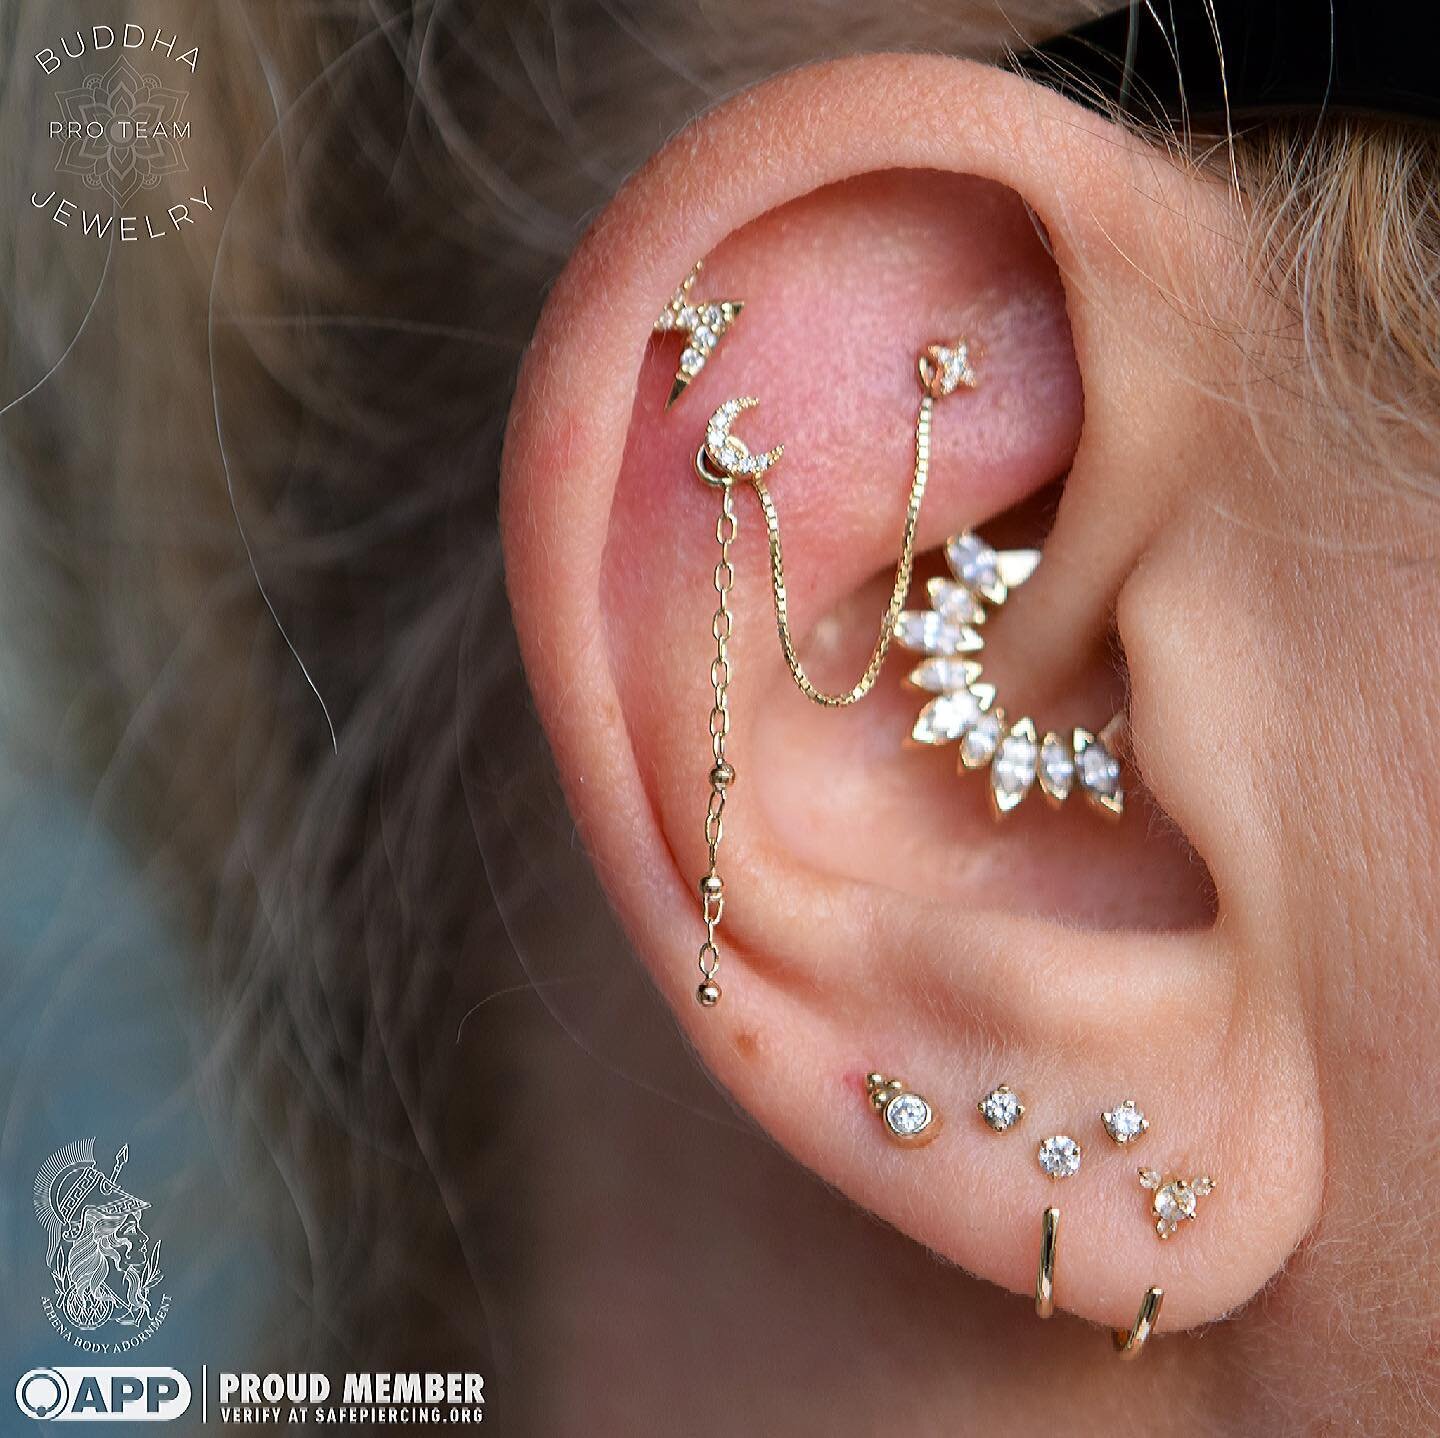 The penultimate curation on the one and only radiant Rebecca!  We&rsquo;ve been working on her dream ear for quite awhile now, adding her #helixpiercing #fauxrook #daithpiercing #flatpiercing and #stackedlobe piercings over the years.  Featuring genu